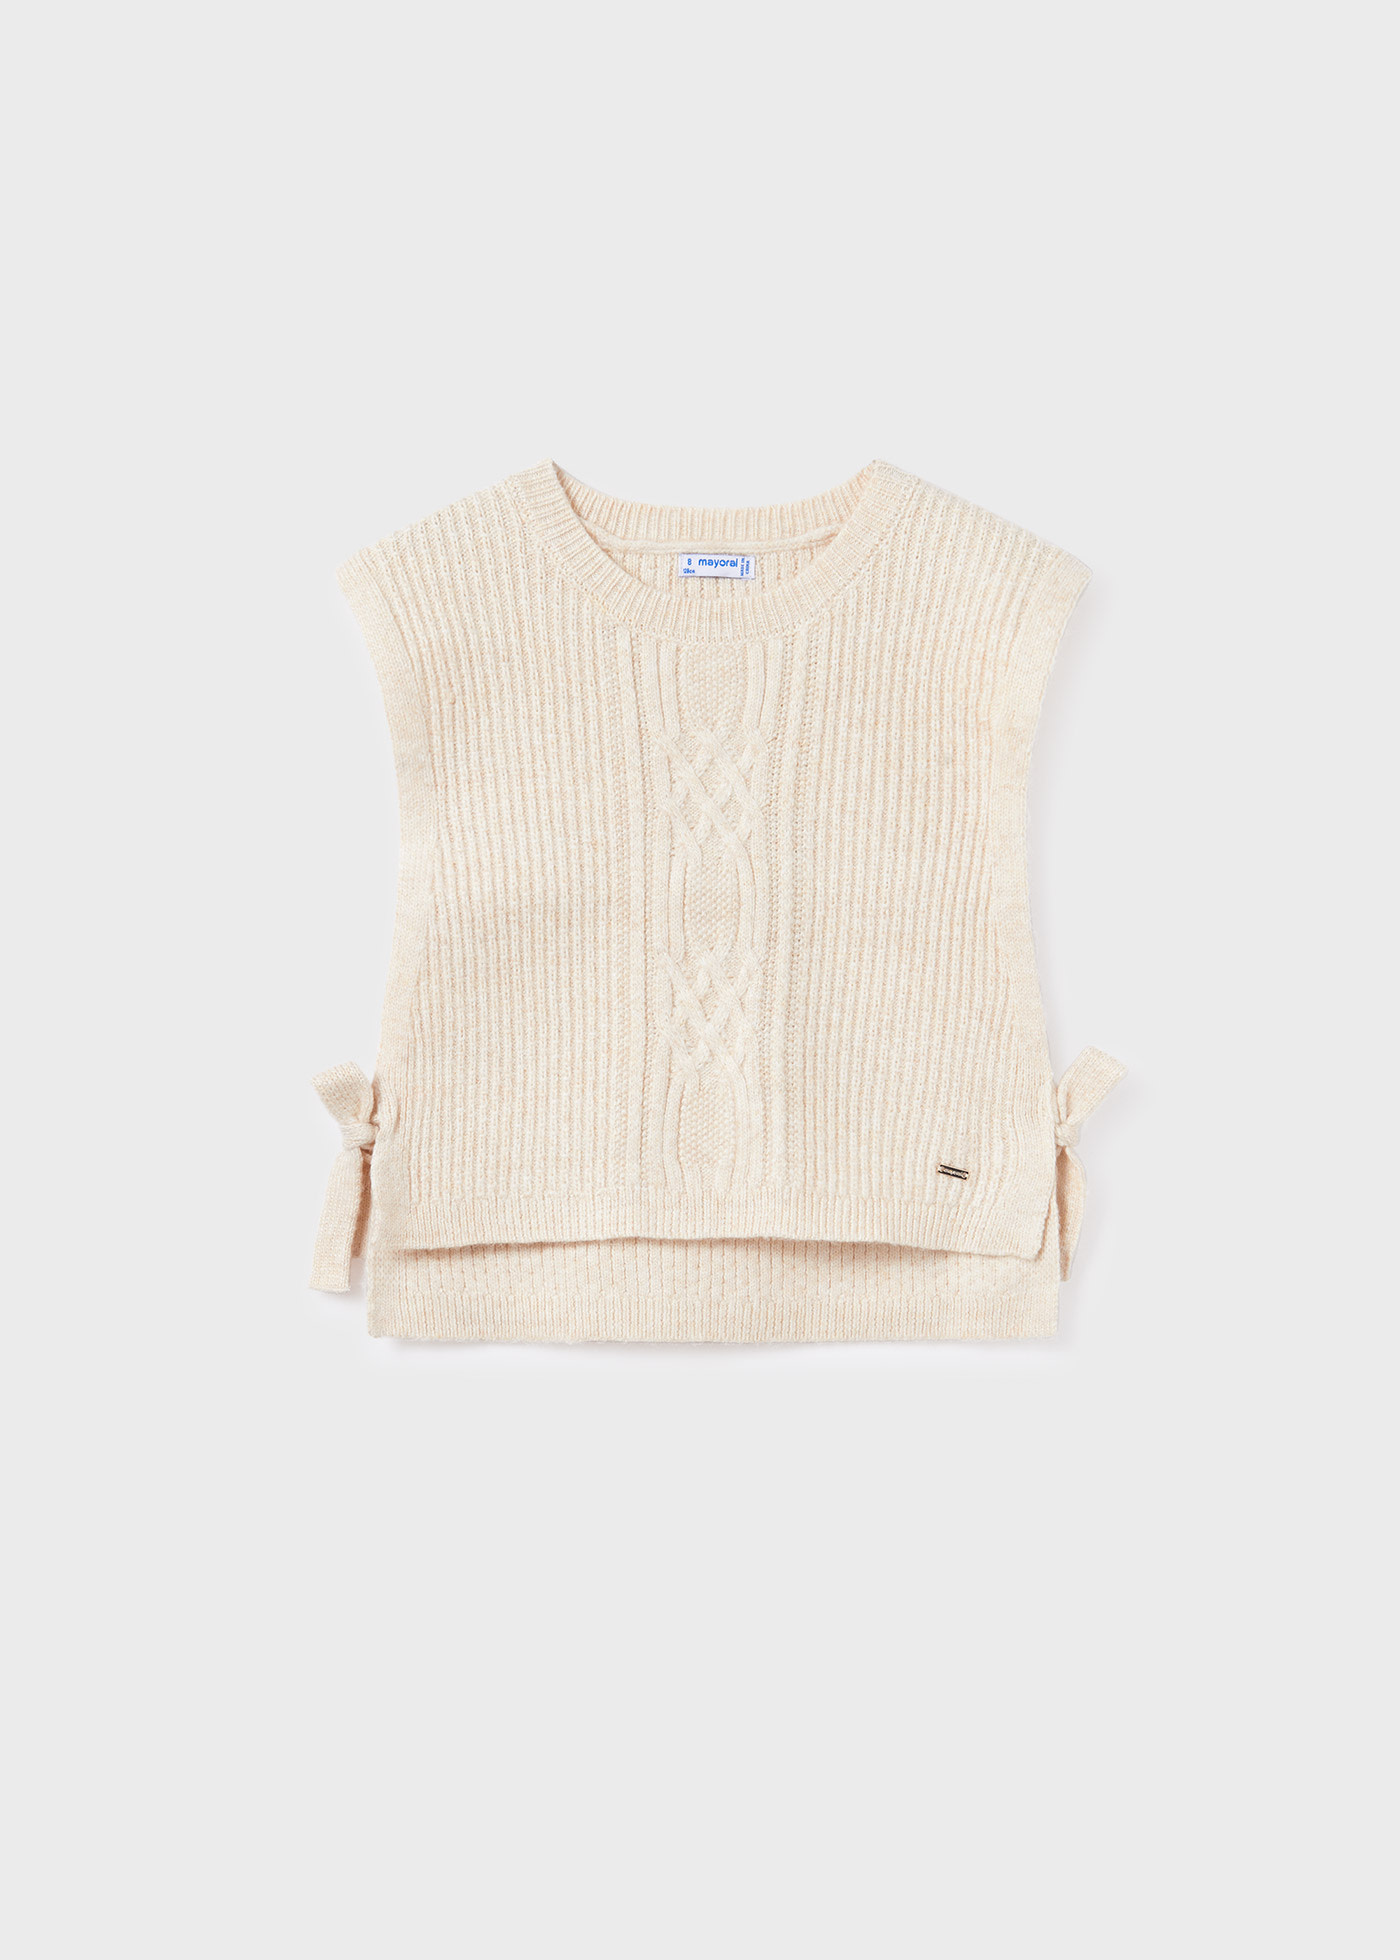 Knit vest recycled fibers girl